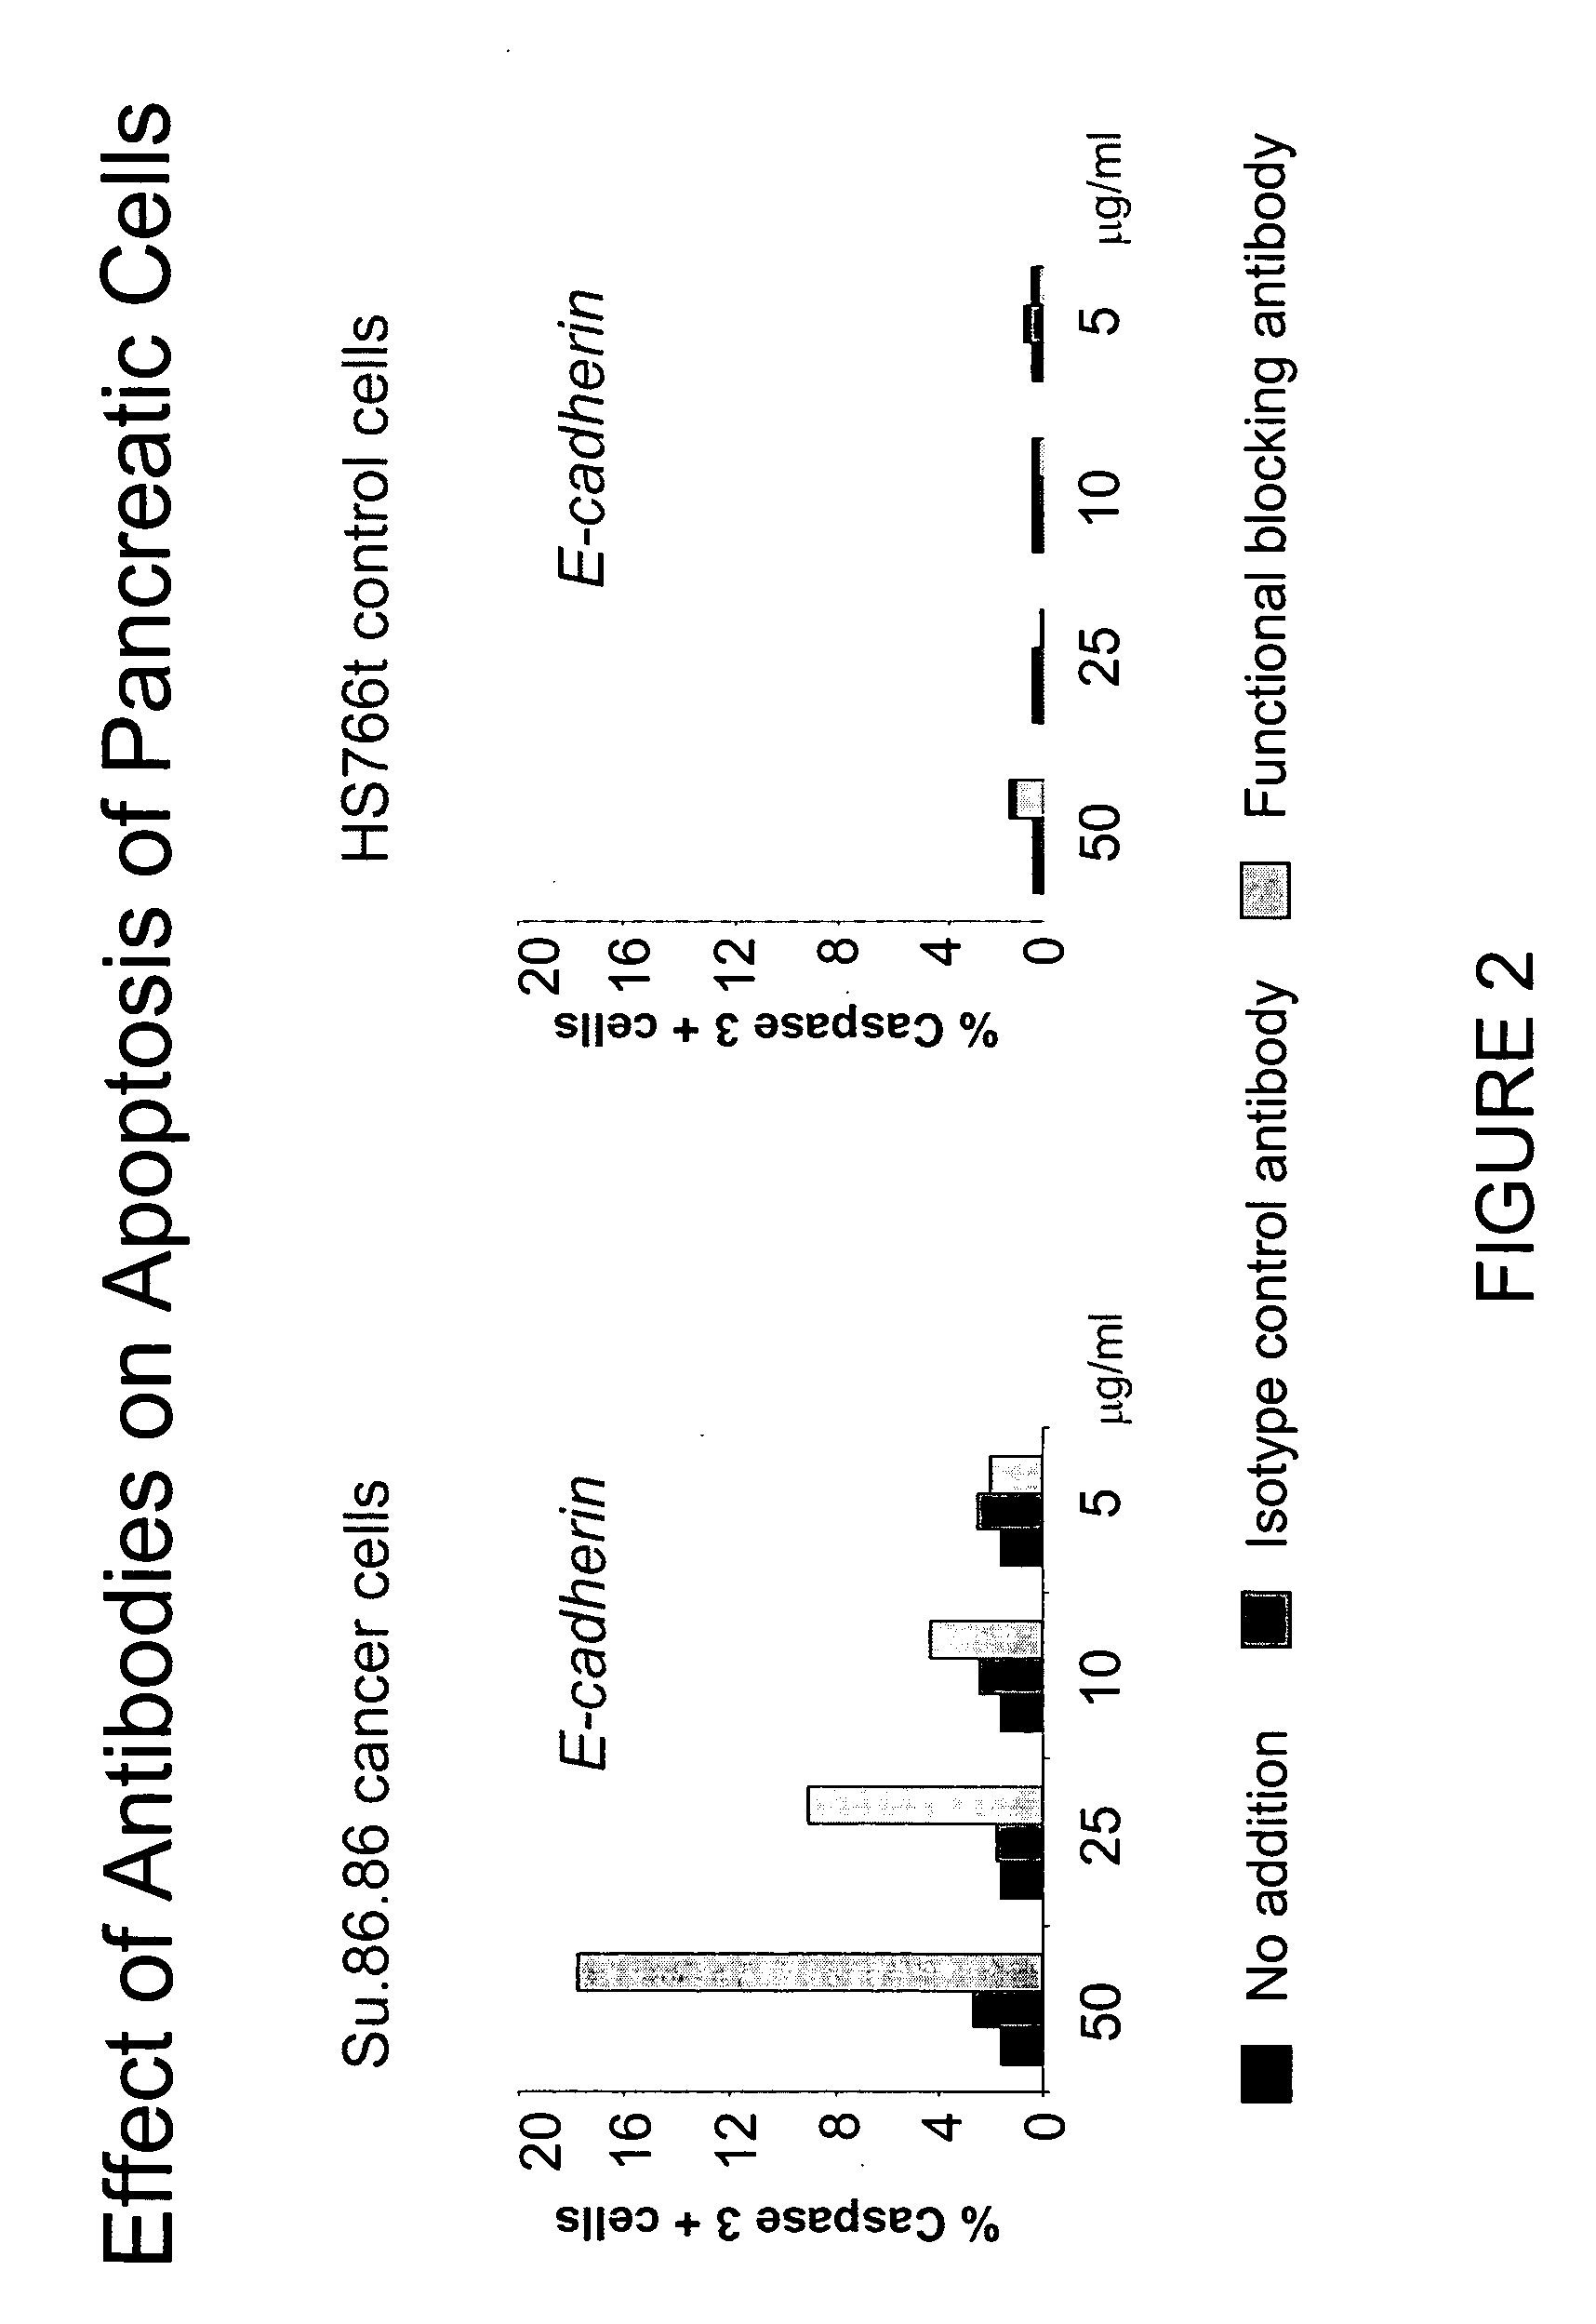 Method and compositions for treating diseases targeting E-cadherin